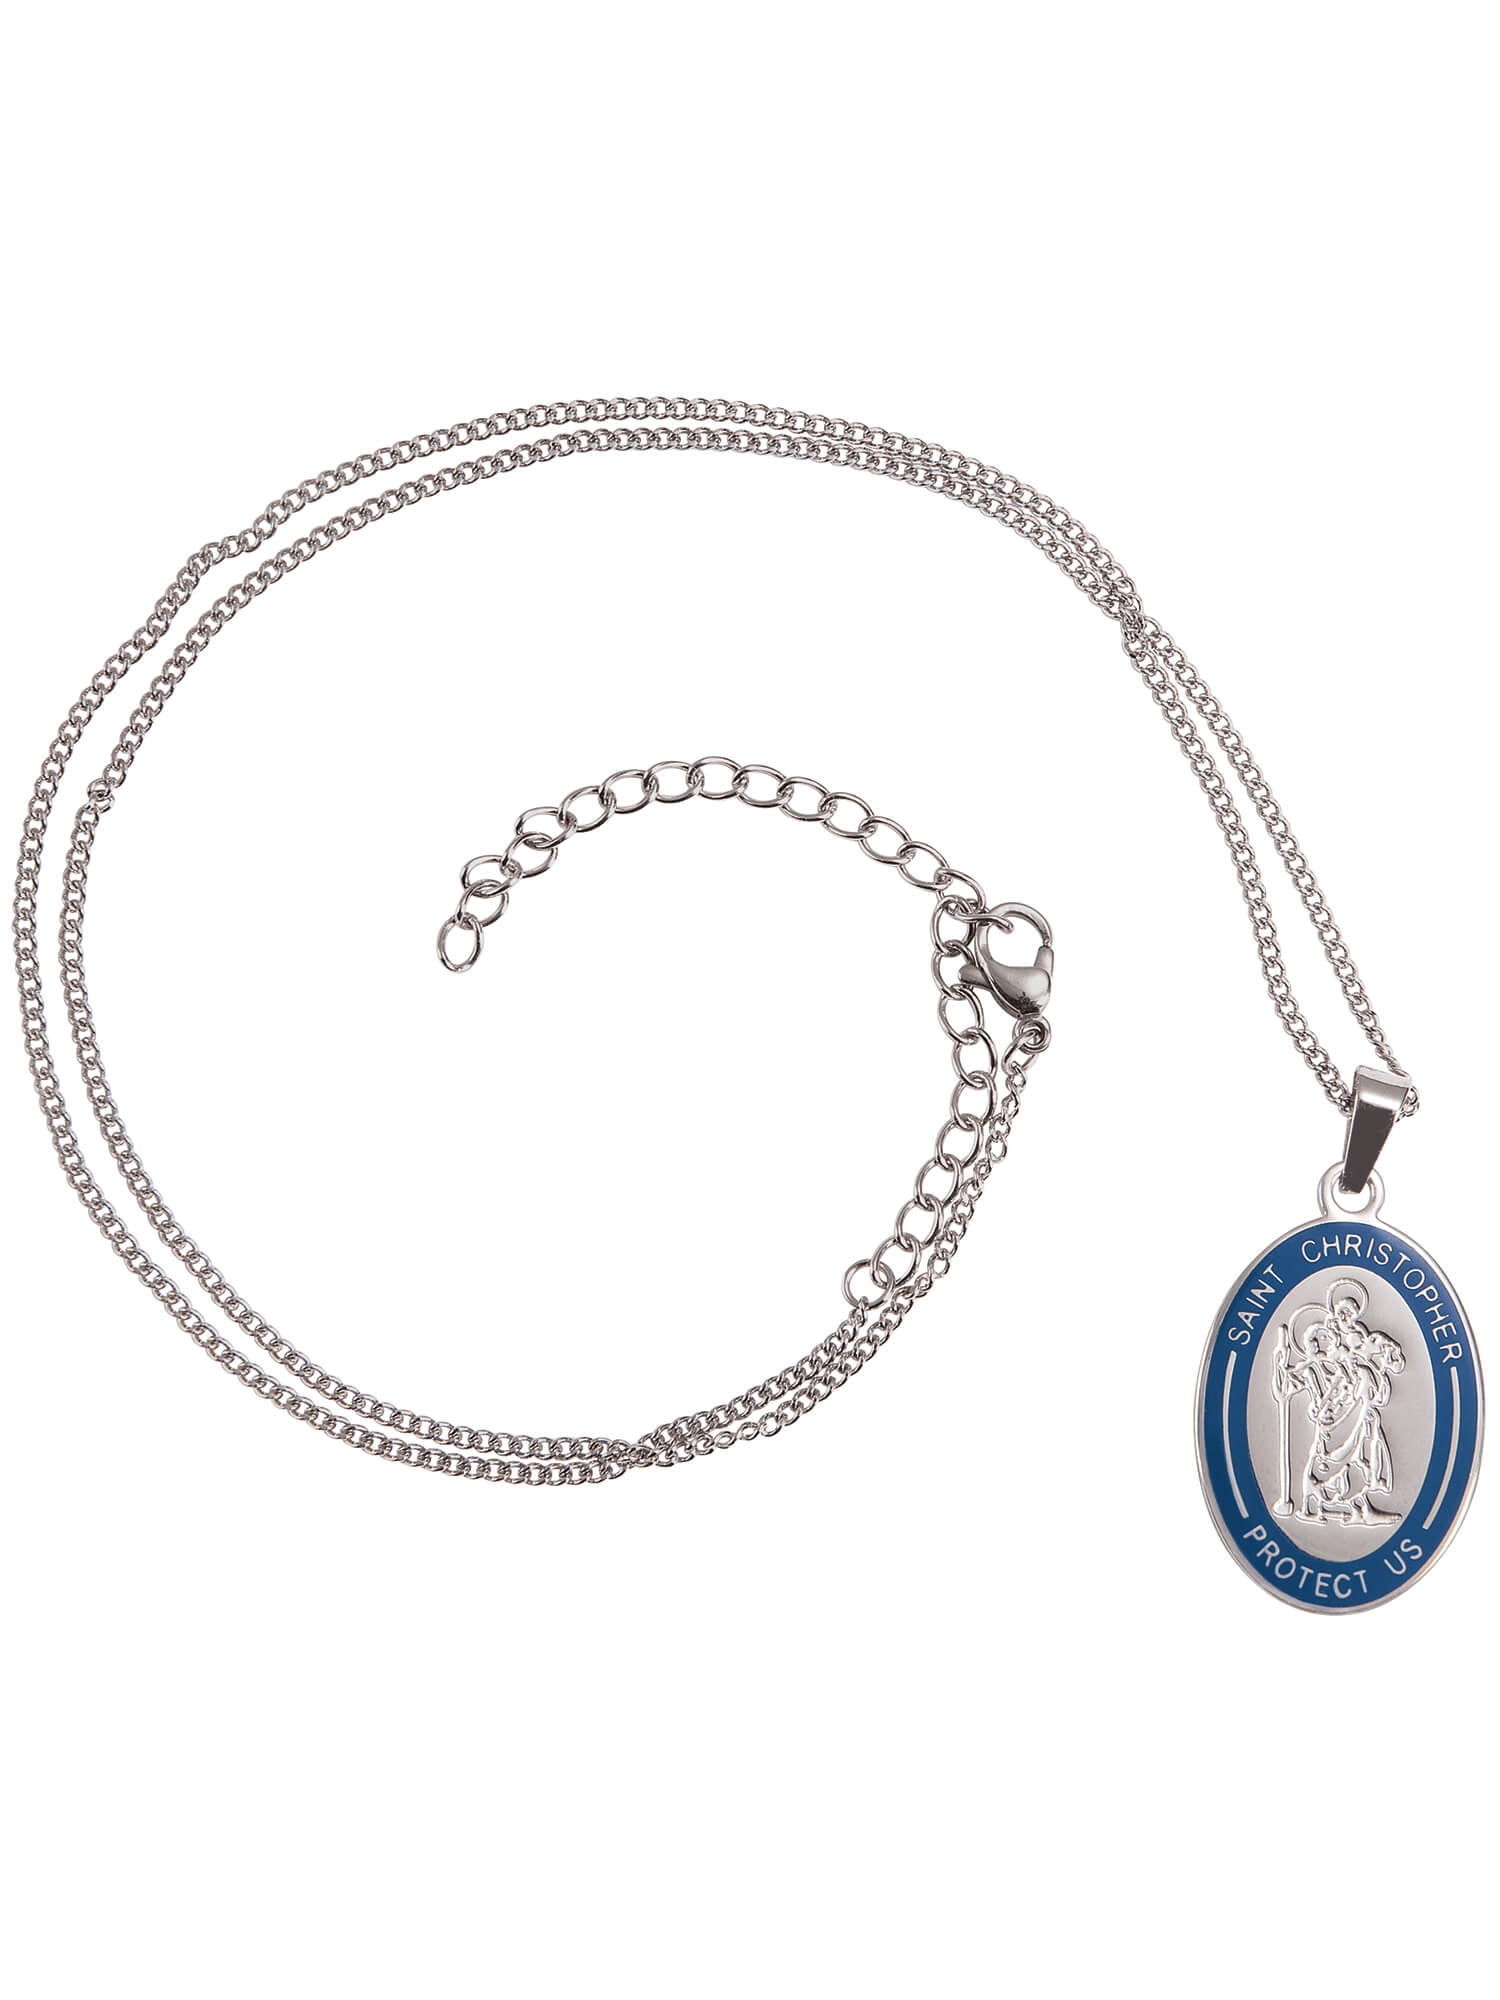 St Christopher necklace for a great trip – My Camino Jewellery